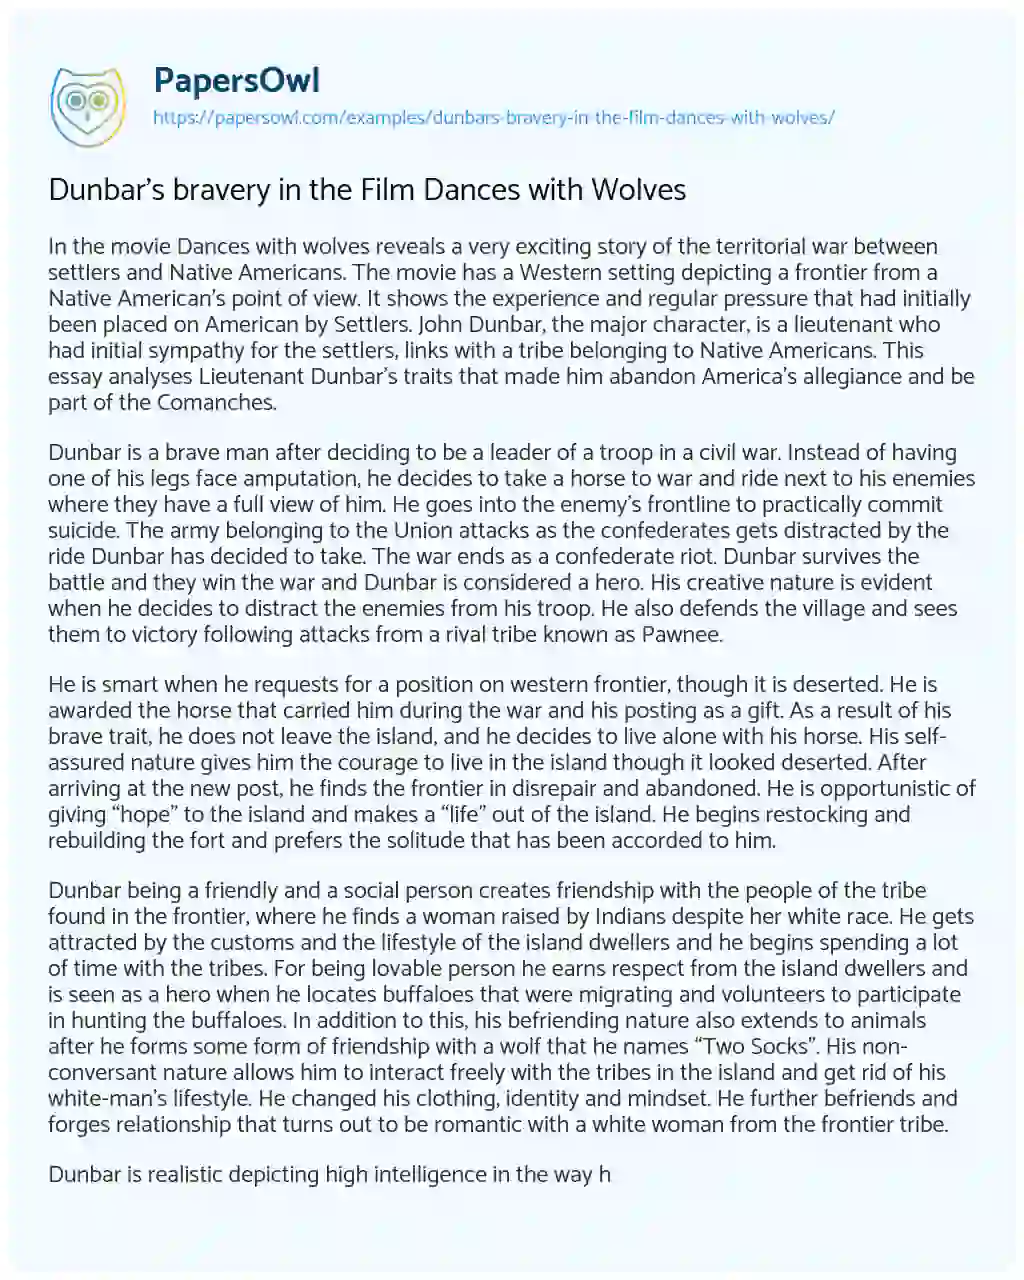 Essay on Dunbar’s Bravery in the Film Dances with Wolves